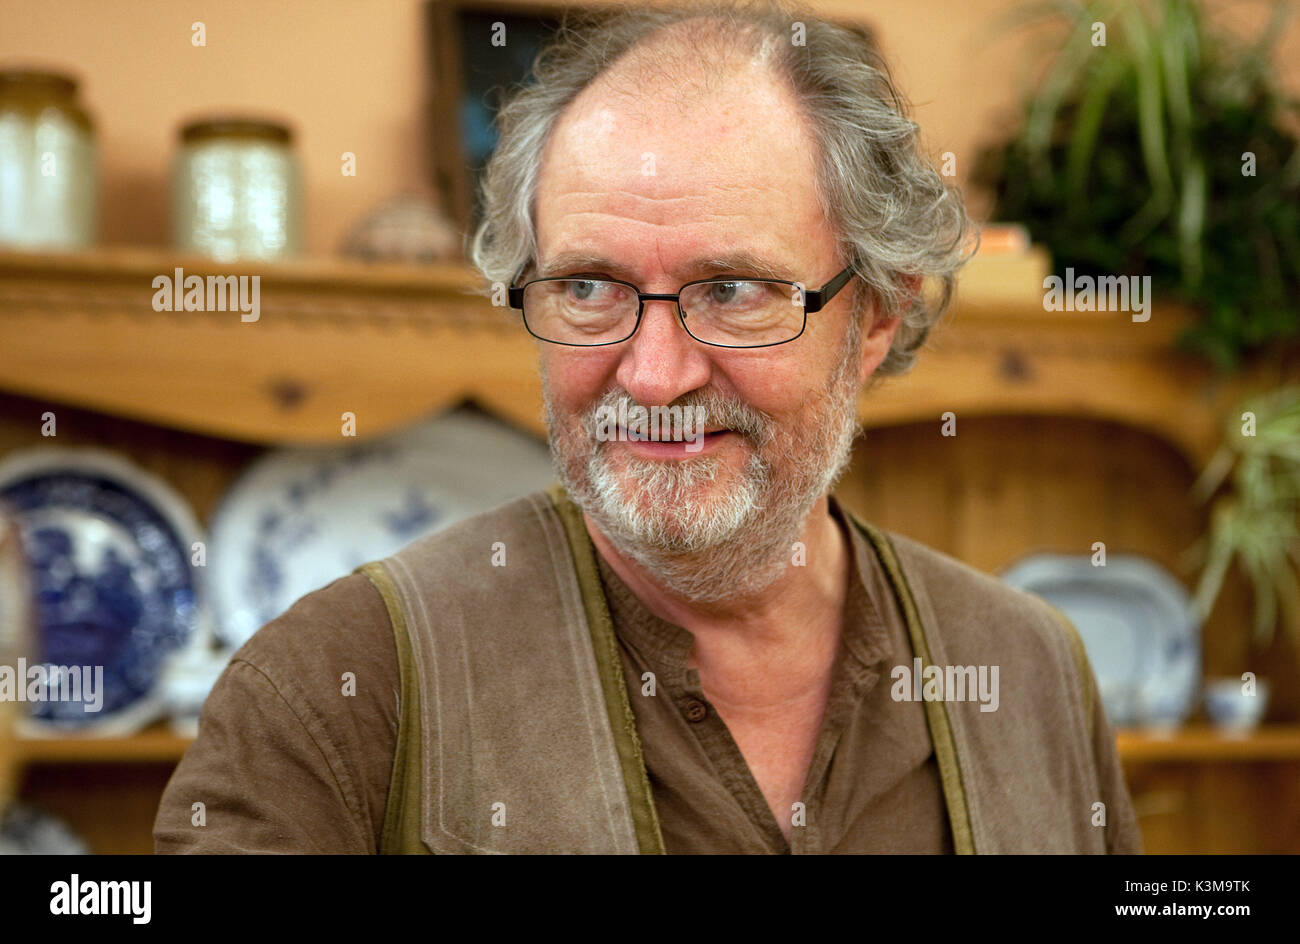 ANOTHER YEAR Jim Broadbent  ANOTHER YEAR Jim Broadbent        Date: 2010 Stock Photo